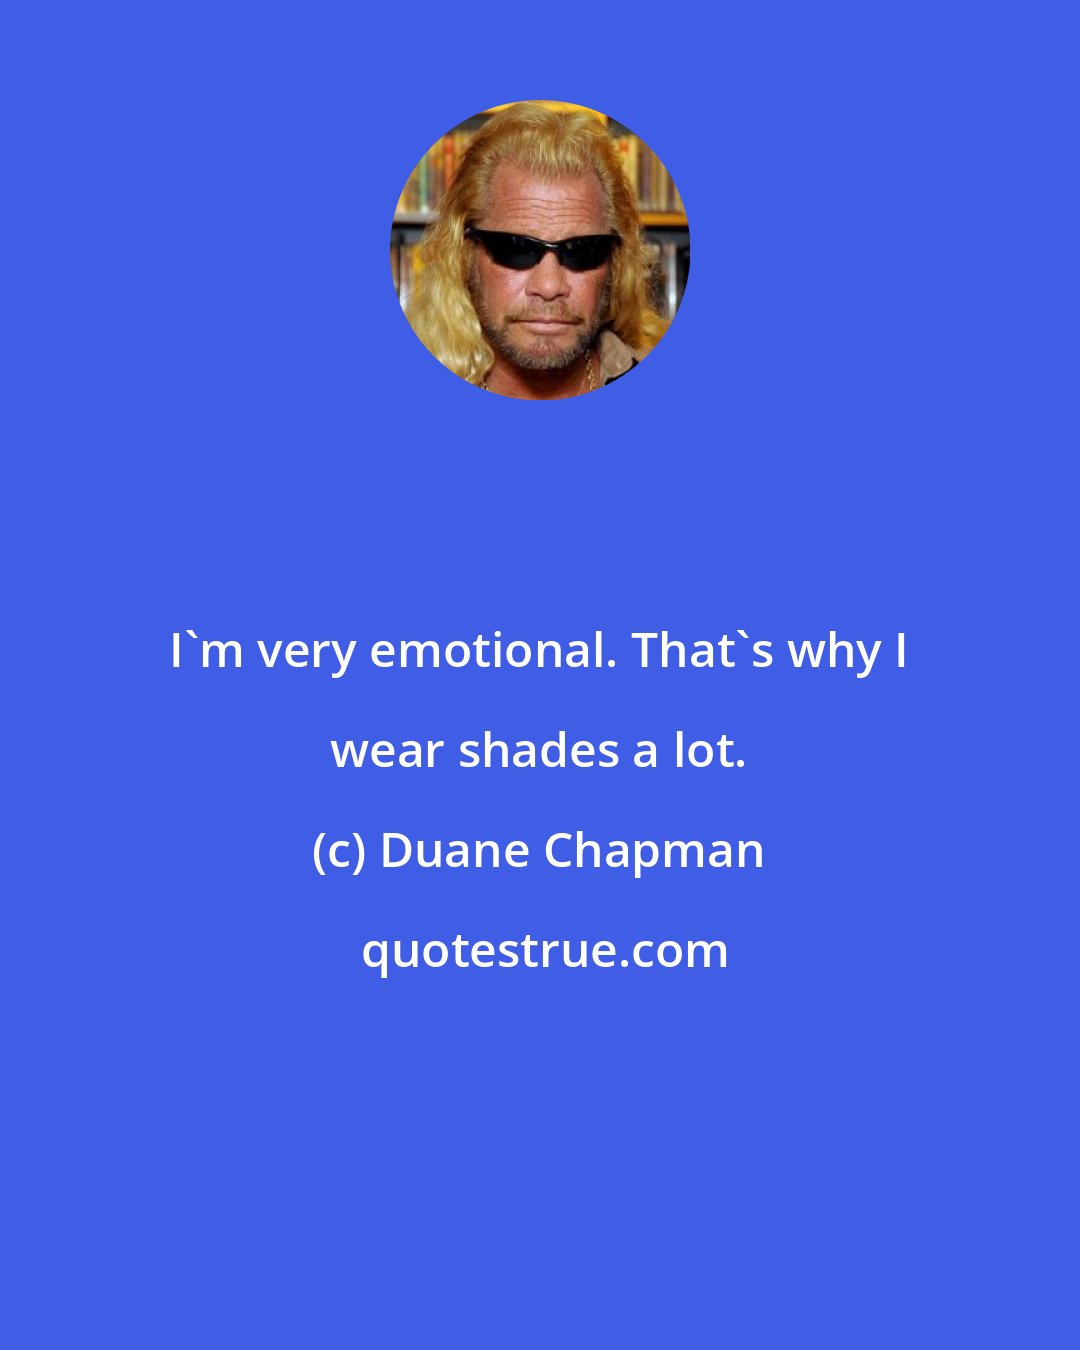 Duane Chapman: I'm very emotional. That's why I wear shades a lot.